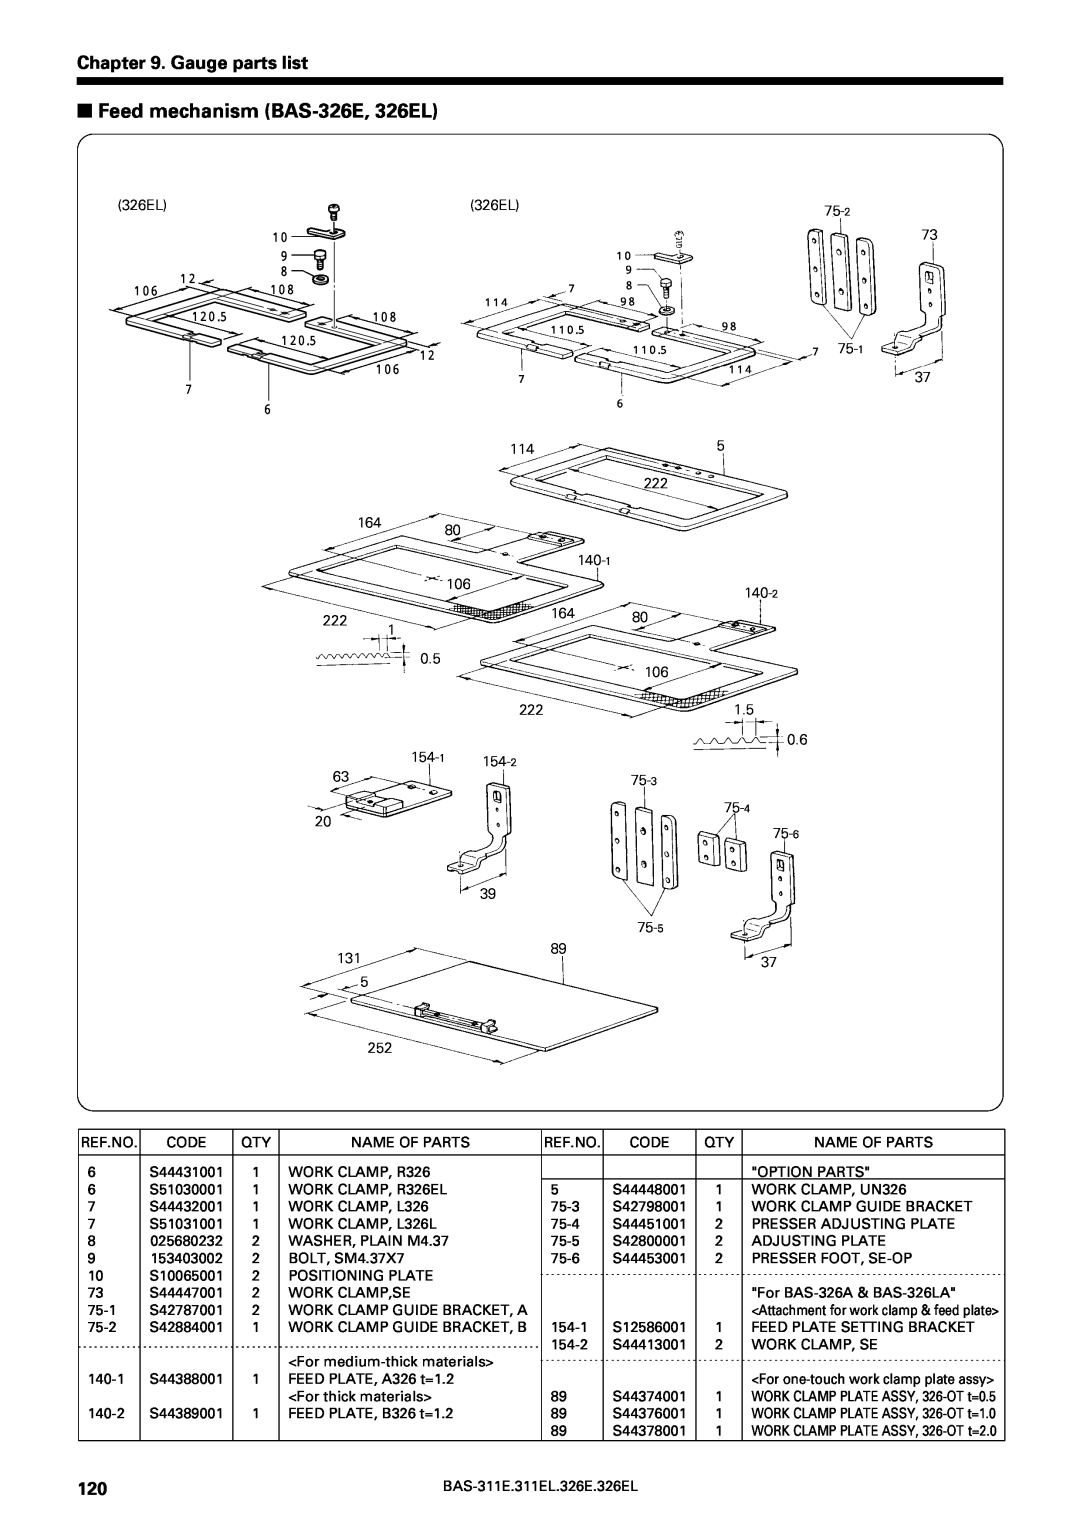 Brother BAS-311E service manual Feed mechanism BAS-326E, 326EL, Gauge parts list, For one-touch work clamp plate assy 